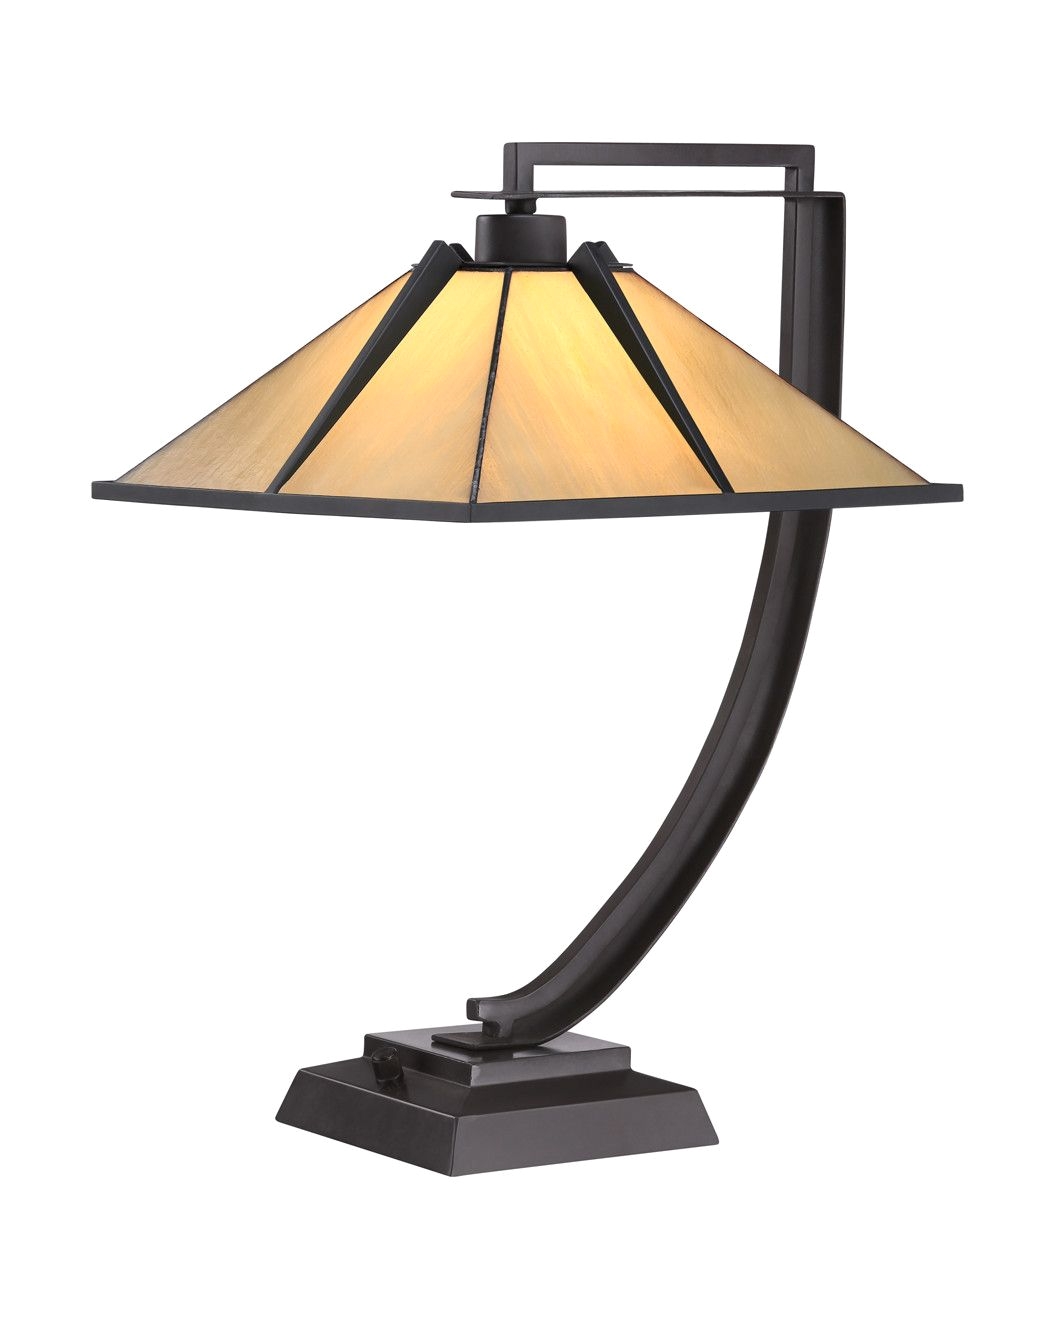 pomeroy western bronze tiffany glass table lamp overstock shopping great deals on quoizel tiffany style lighting